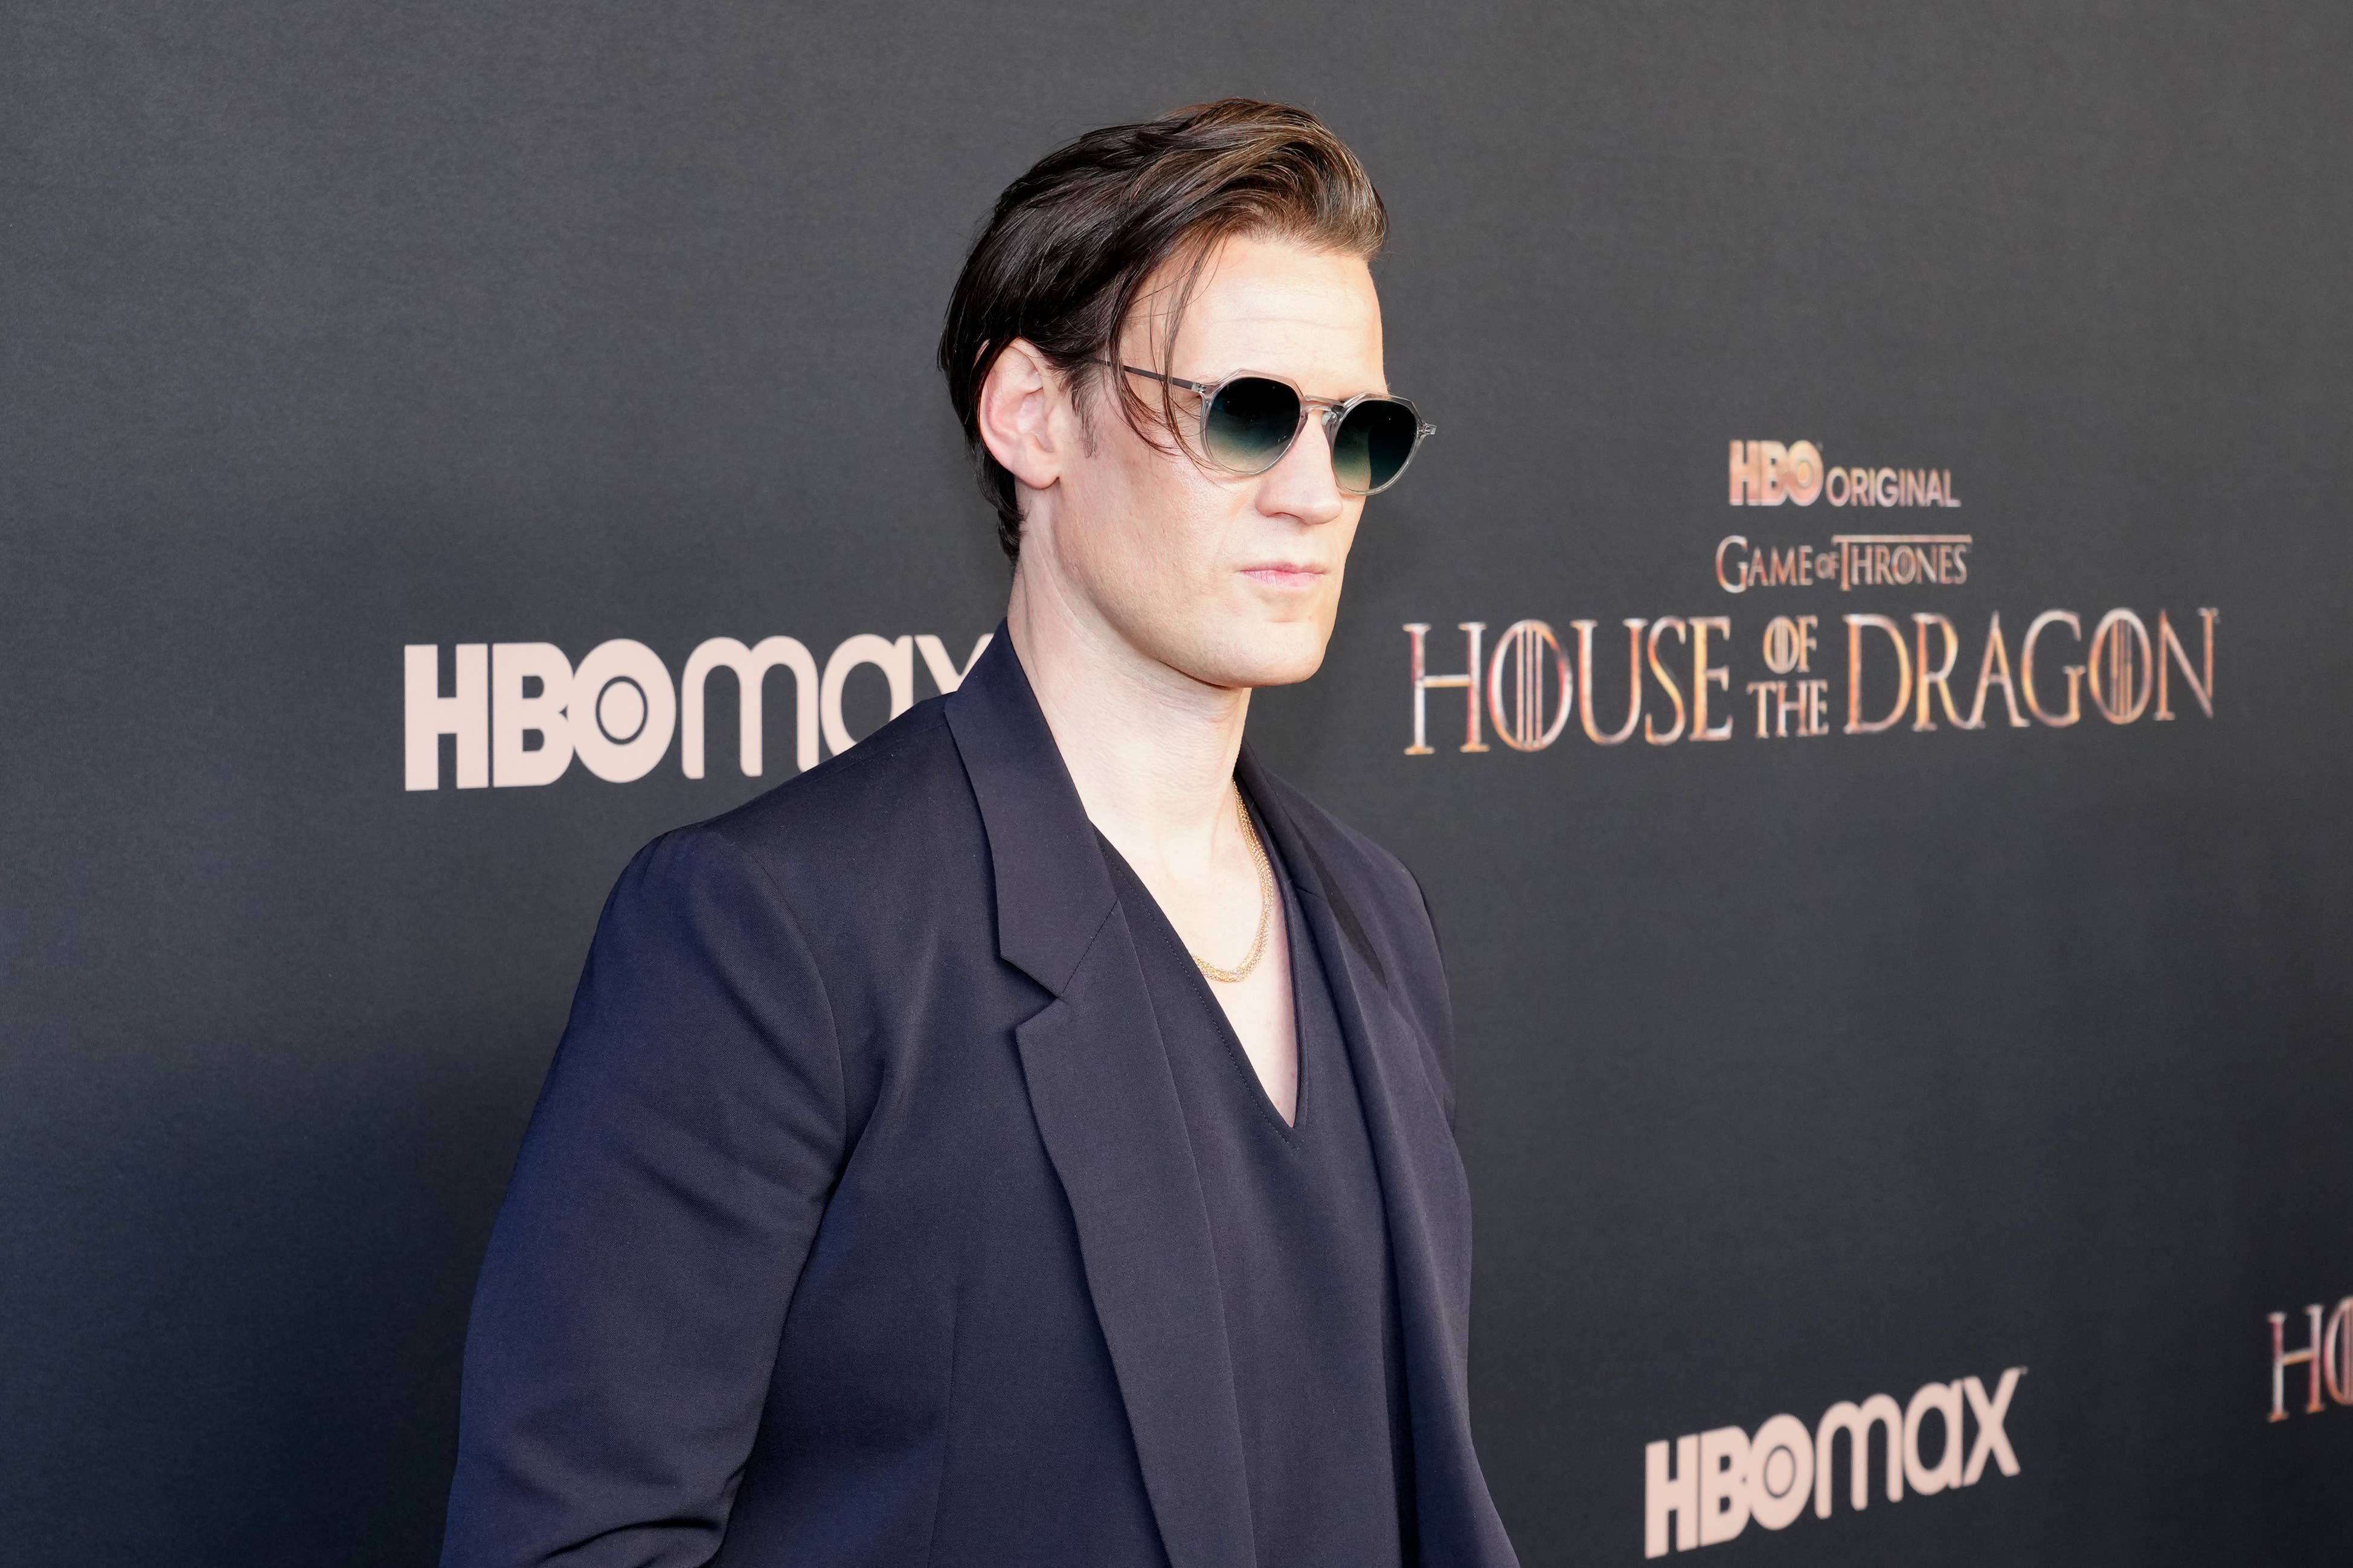 Premiere for HBO's 'House of Dragon'